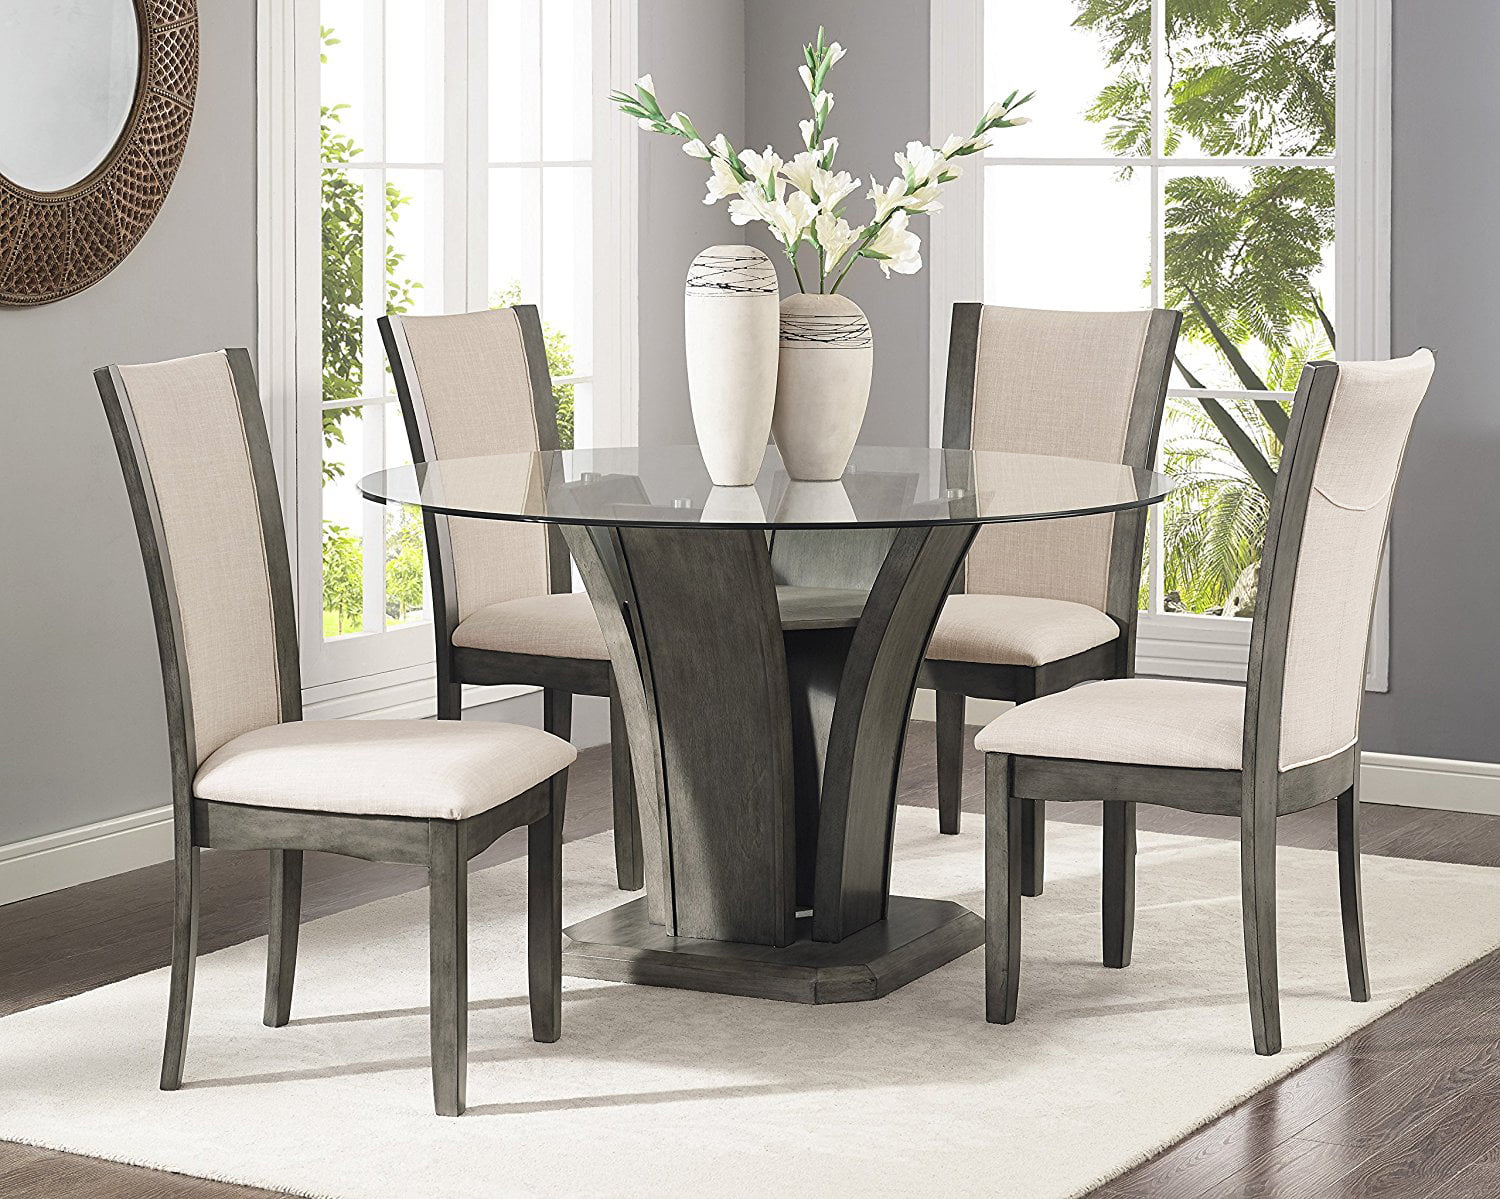 Roundhill Furniture Kecco Grey 5 Piece, 5 Piece Round Glass Dining Table Set